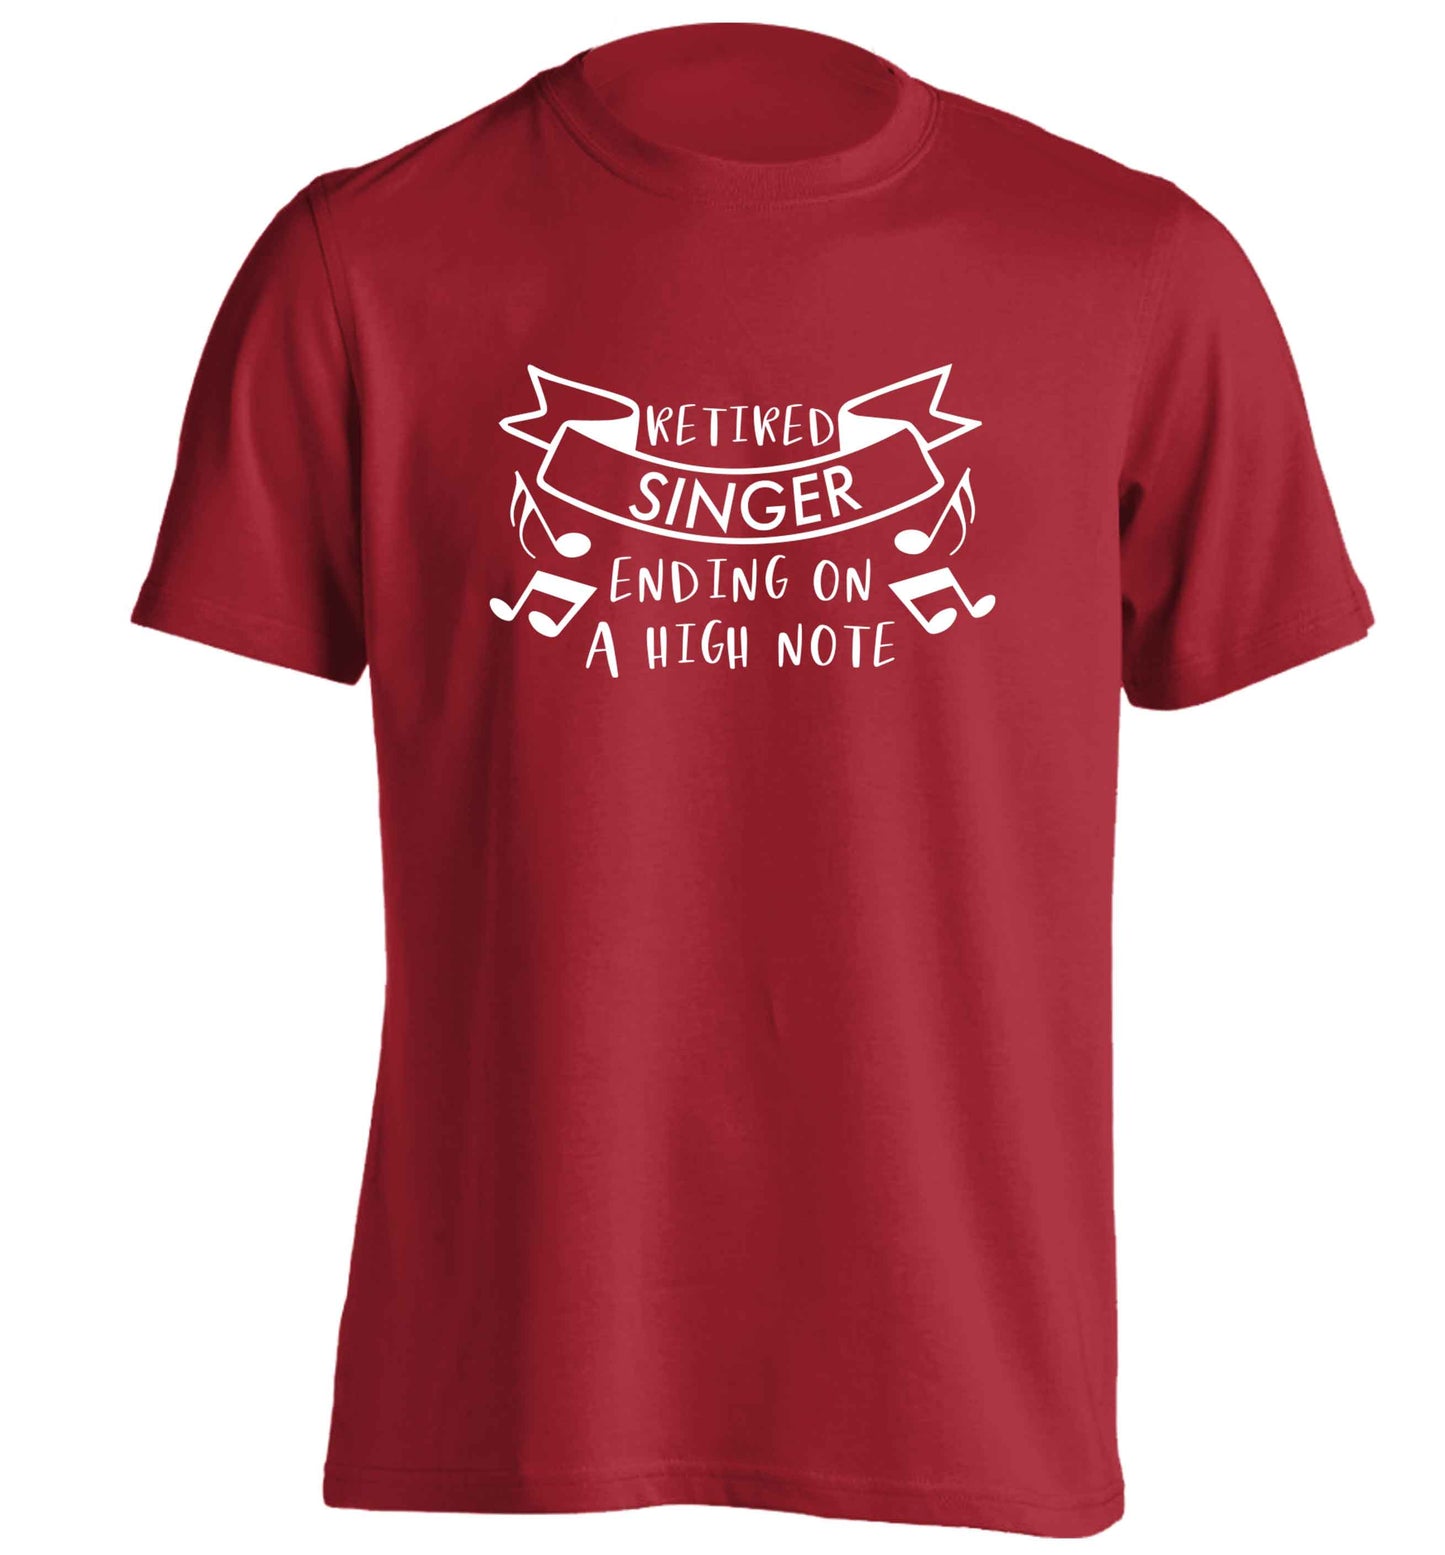 Retired singer ending on a high note adults unisex red Tshirt 2XL